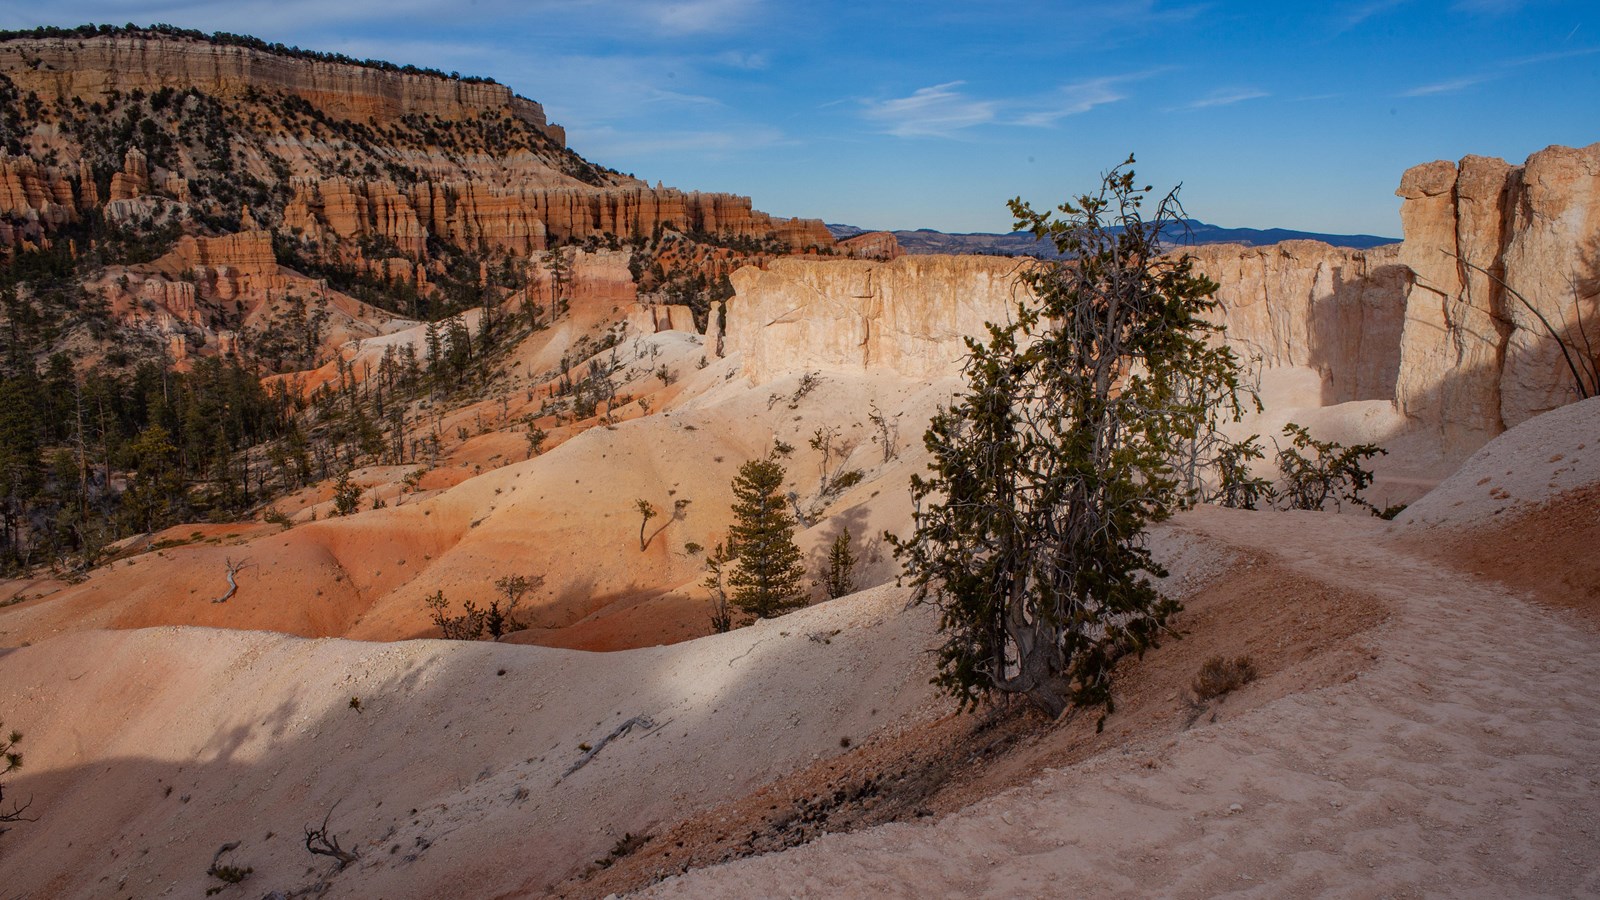 A winding white sediment path winds past pine trees and a landscape of redrock cliffs and spires.